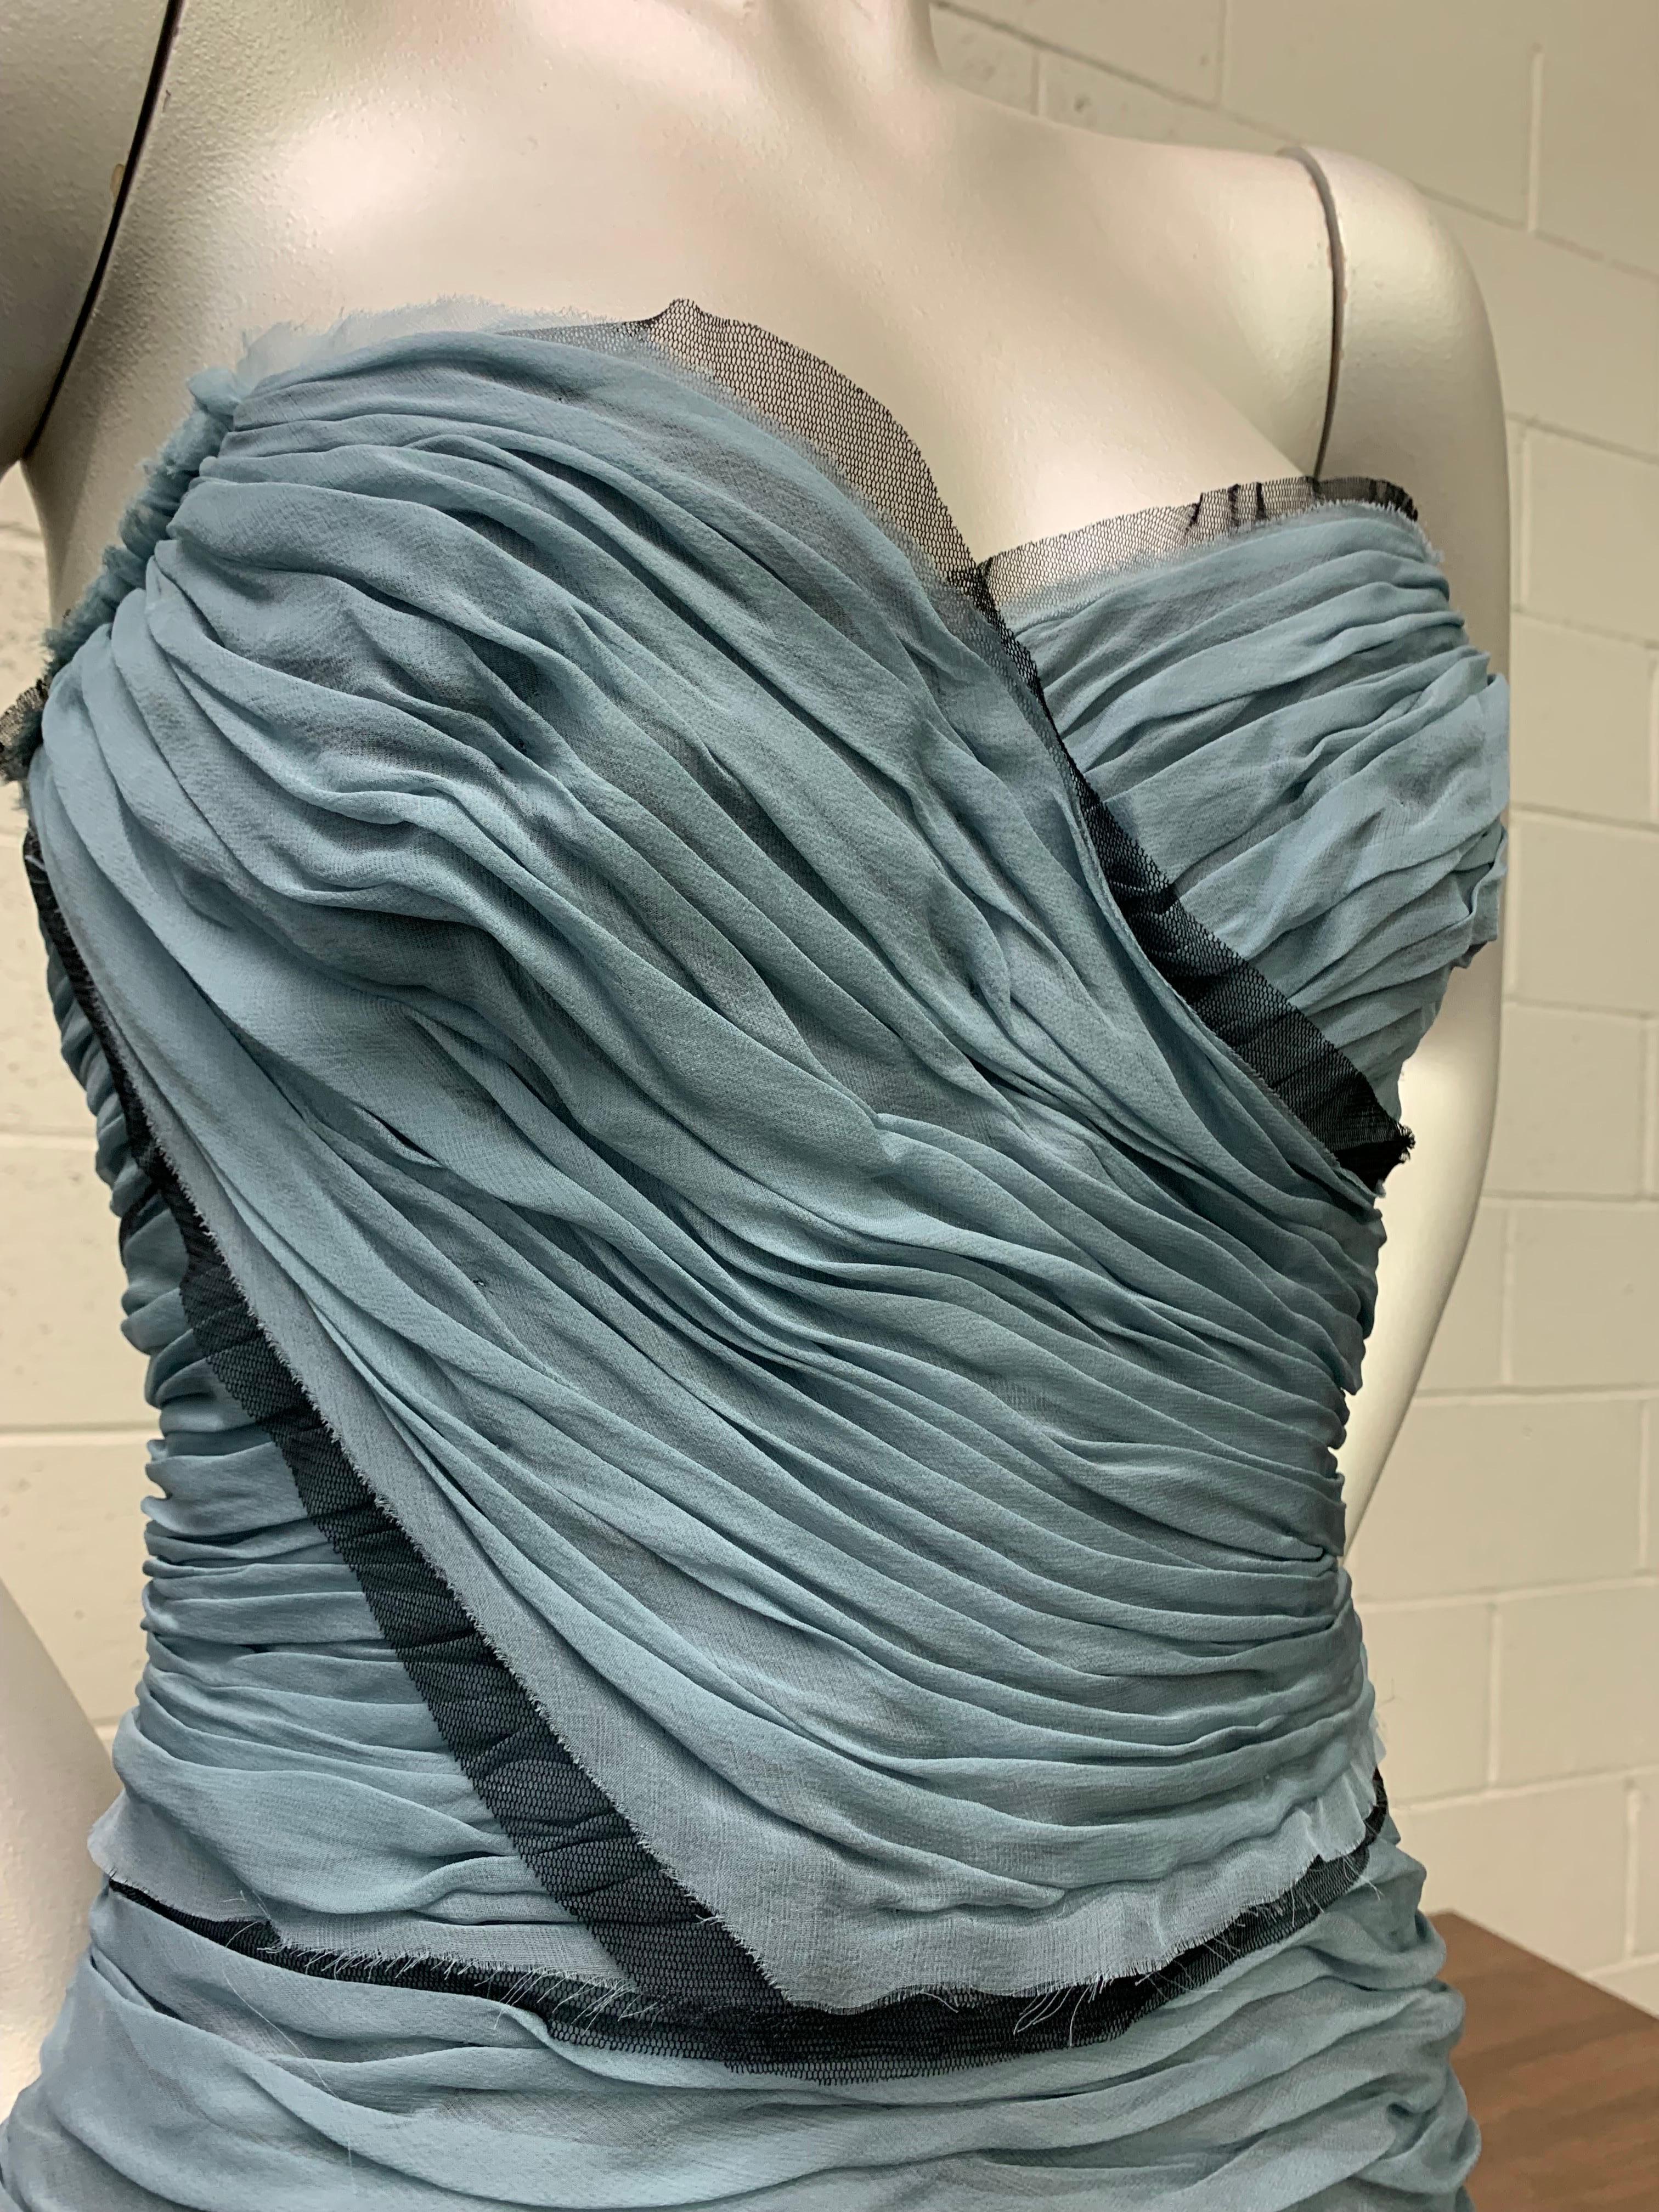 Dolce & Gabbana Pleated Cornflower Chiffon Strapless Body Conscious Sheath Dress In Excellent Condition For Sale In Gresham, OR